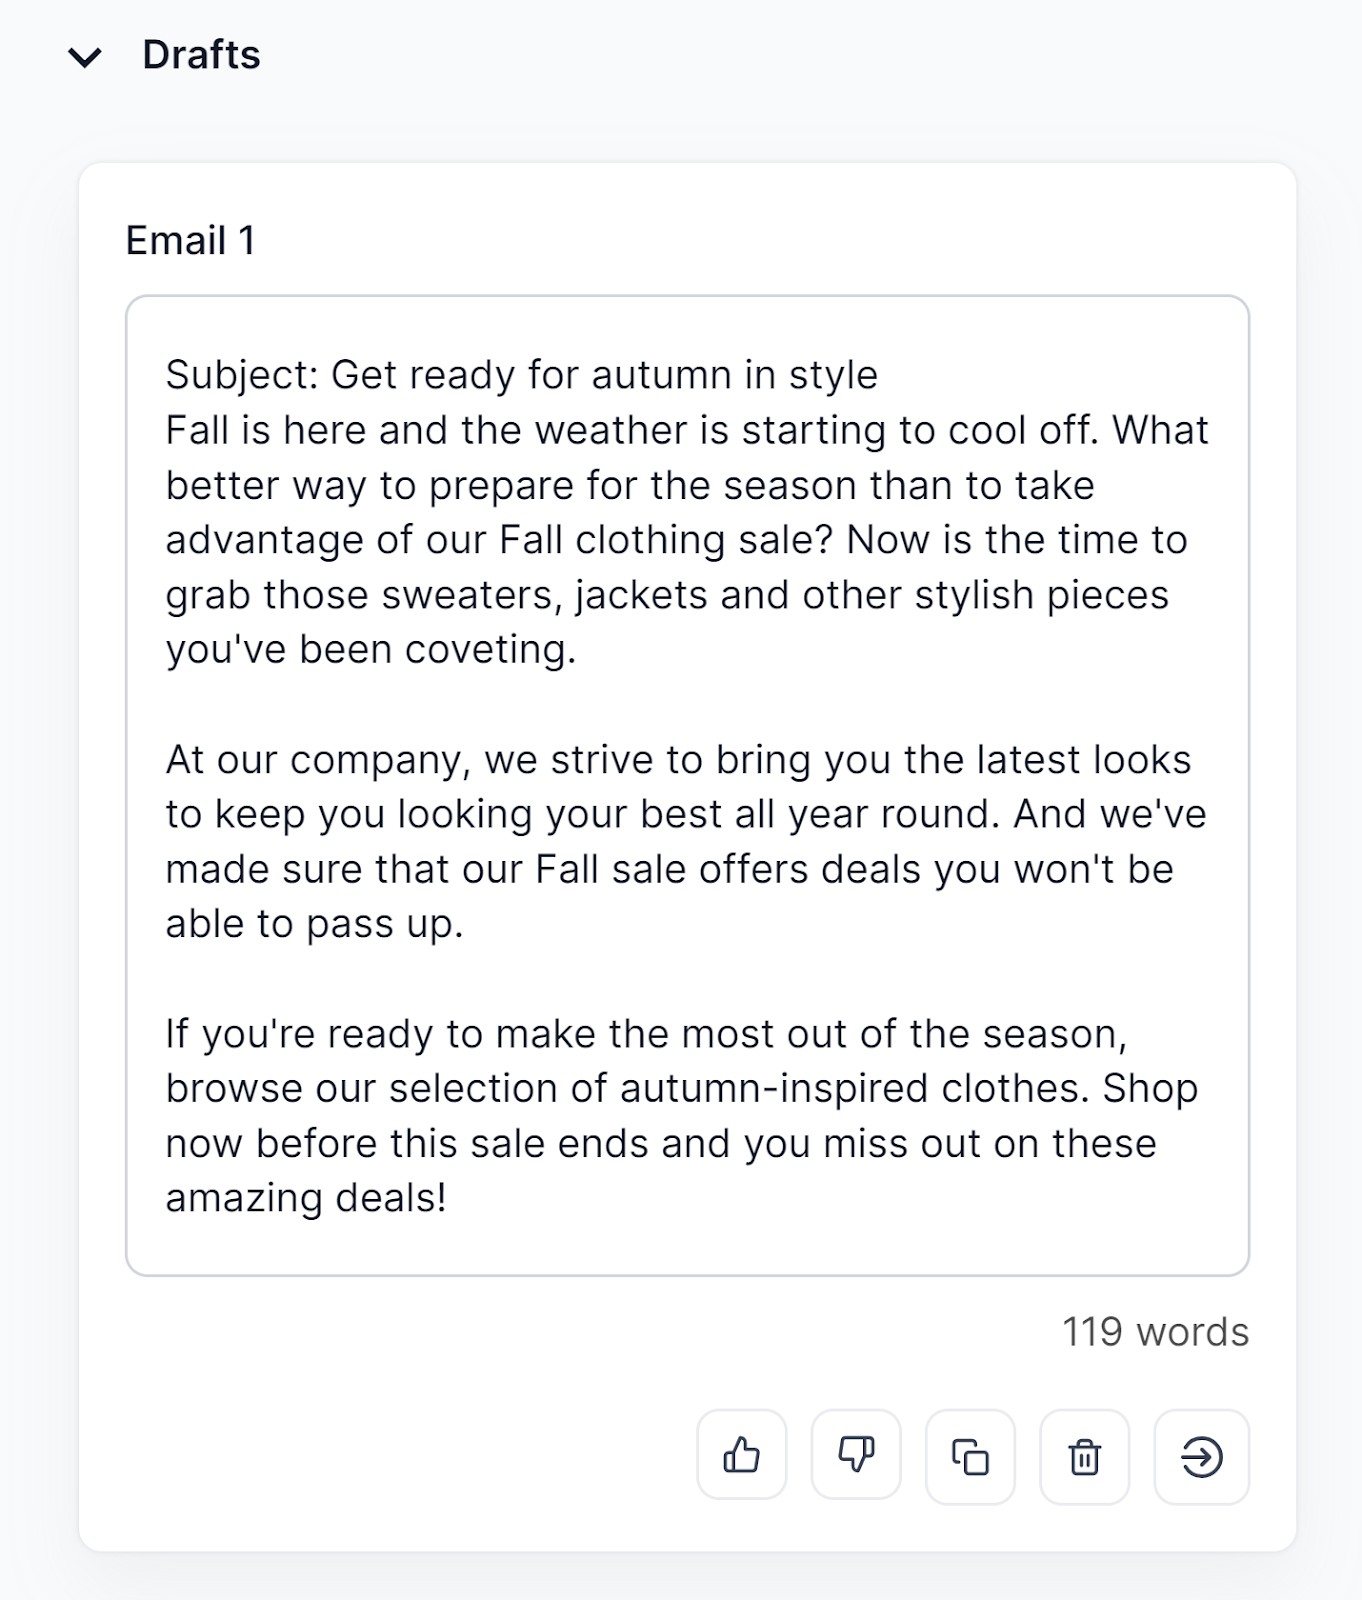 Draft reads "Subject: Get ready for autumn in style Fall is here and the weather is starting to cool off. What better way to prepare for the season than to take advantage of our Fall clothing sale? Now is the time to grab those sweaters, jackets and other stylish pieces you've been coveting.   At our company, we strive to bring you the latest looks to keep you looking your best all year round. And we've made sure that our Fall sale offers deals you won't be able to pass up.   If you're ready to make the most out of the season, browse our selection of autumn-inspired clothes. Shop now before this sale ends and you miss out on these amazing deals!" ; AI Copywriting tools